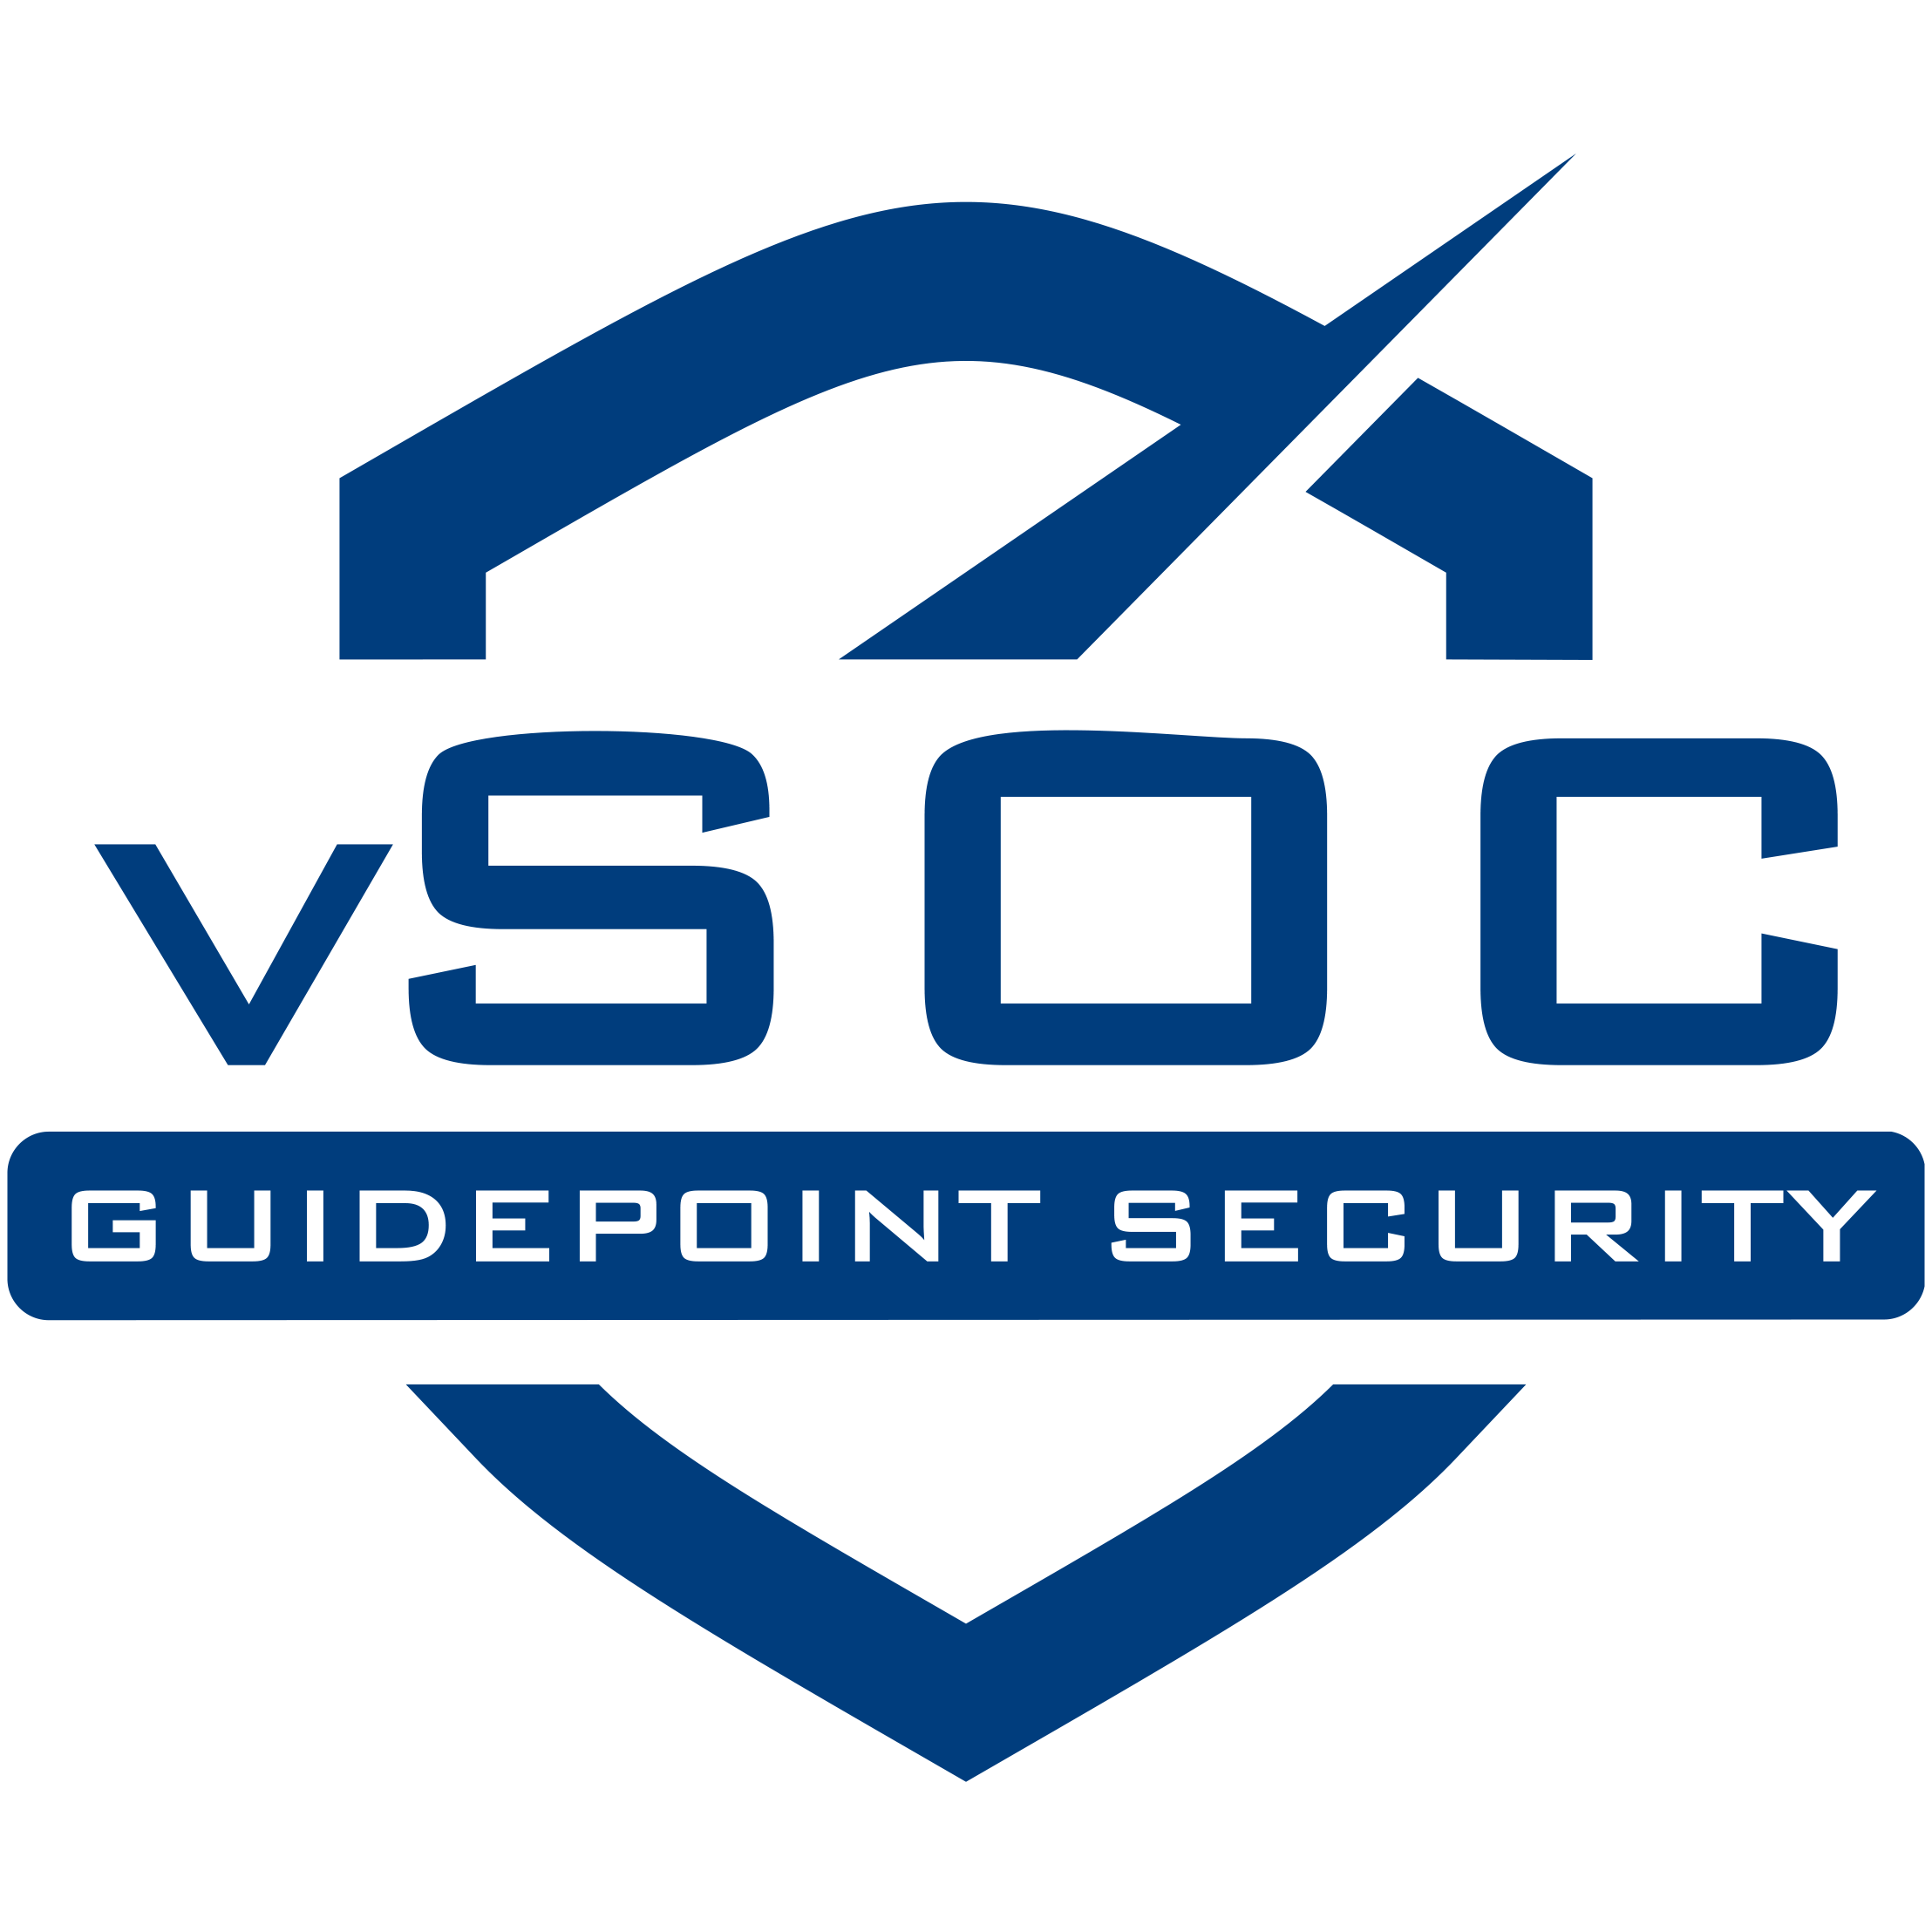 GuidePoint Security's vSOC